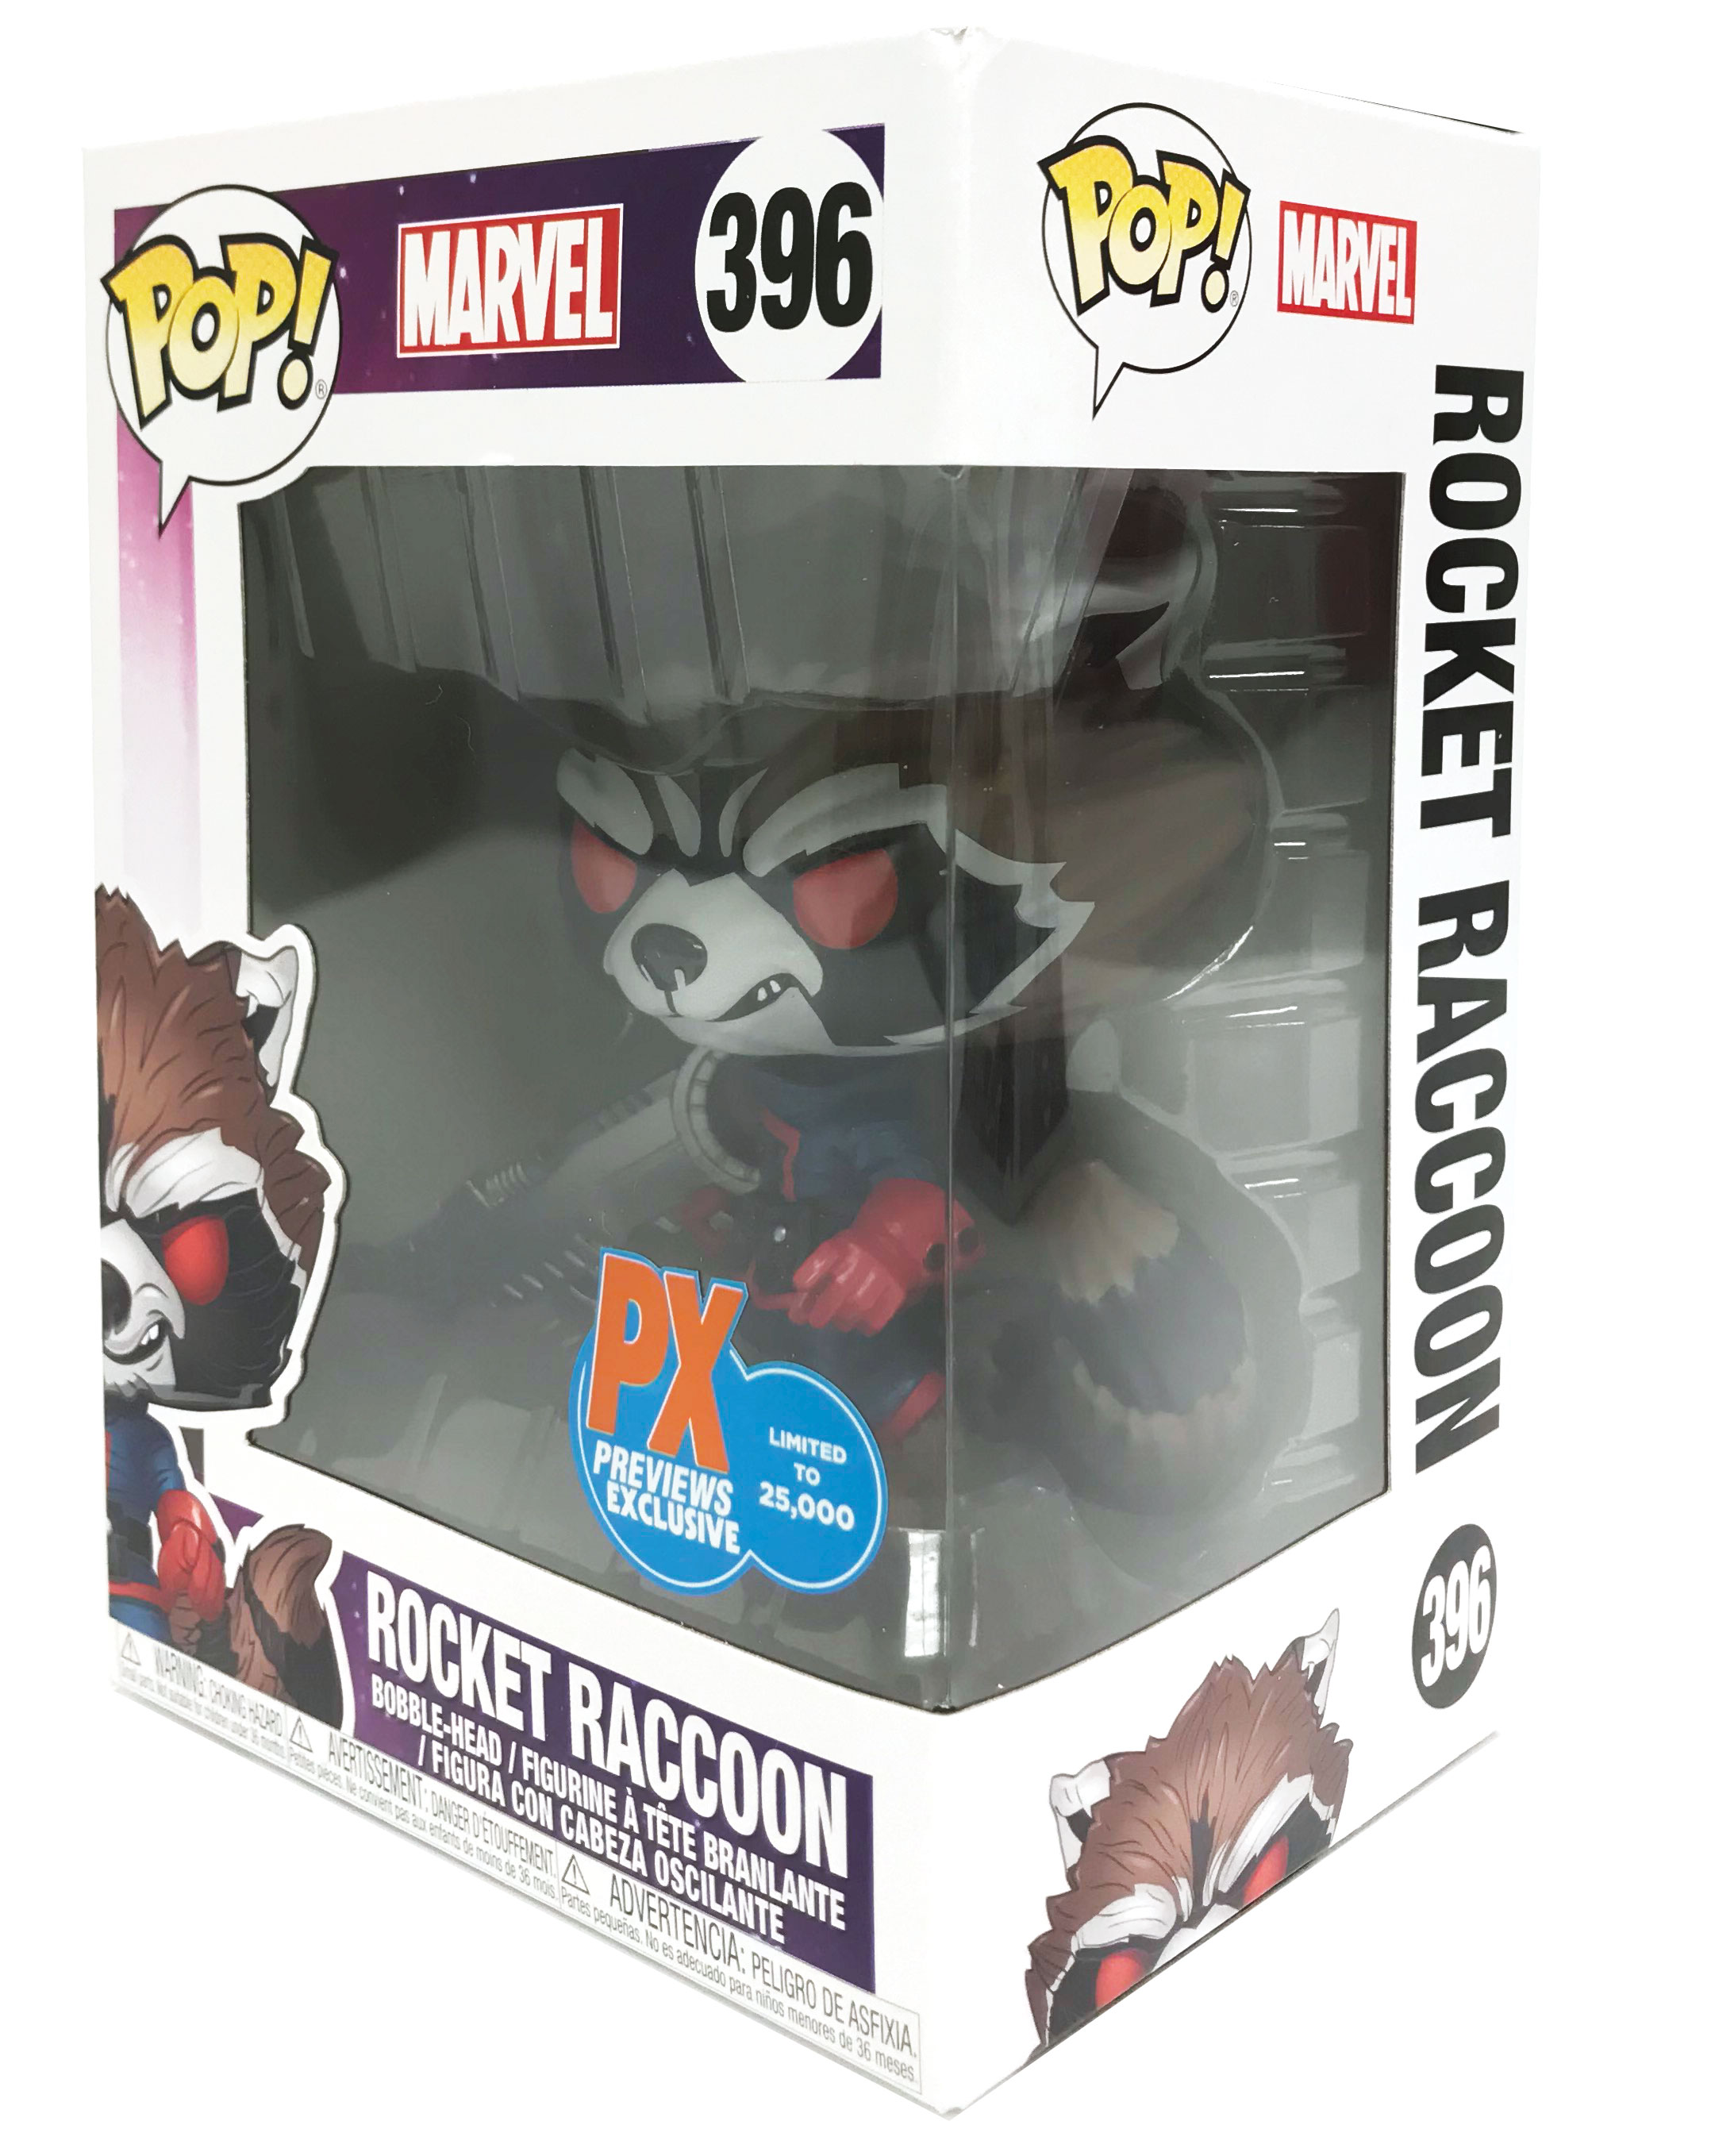 Pop! Marvel: Guardians of the Galaxy - Star-Lord (Classic) PX Previews  Exclusive